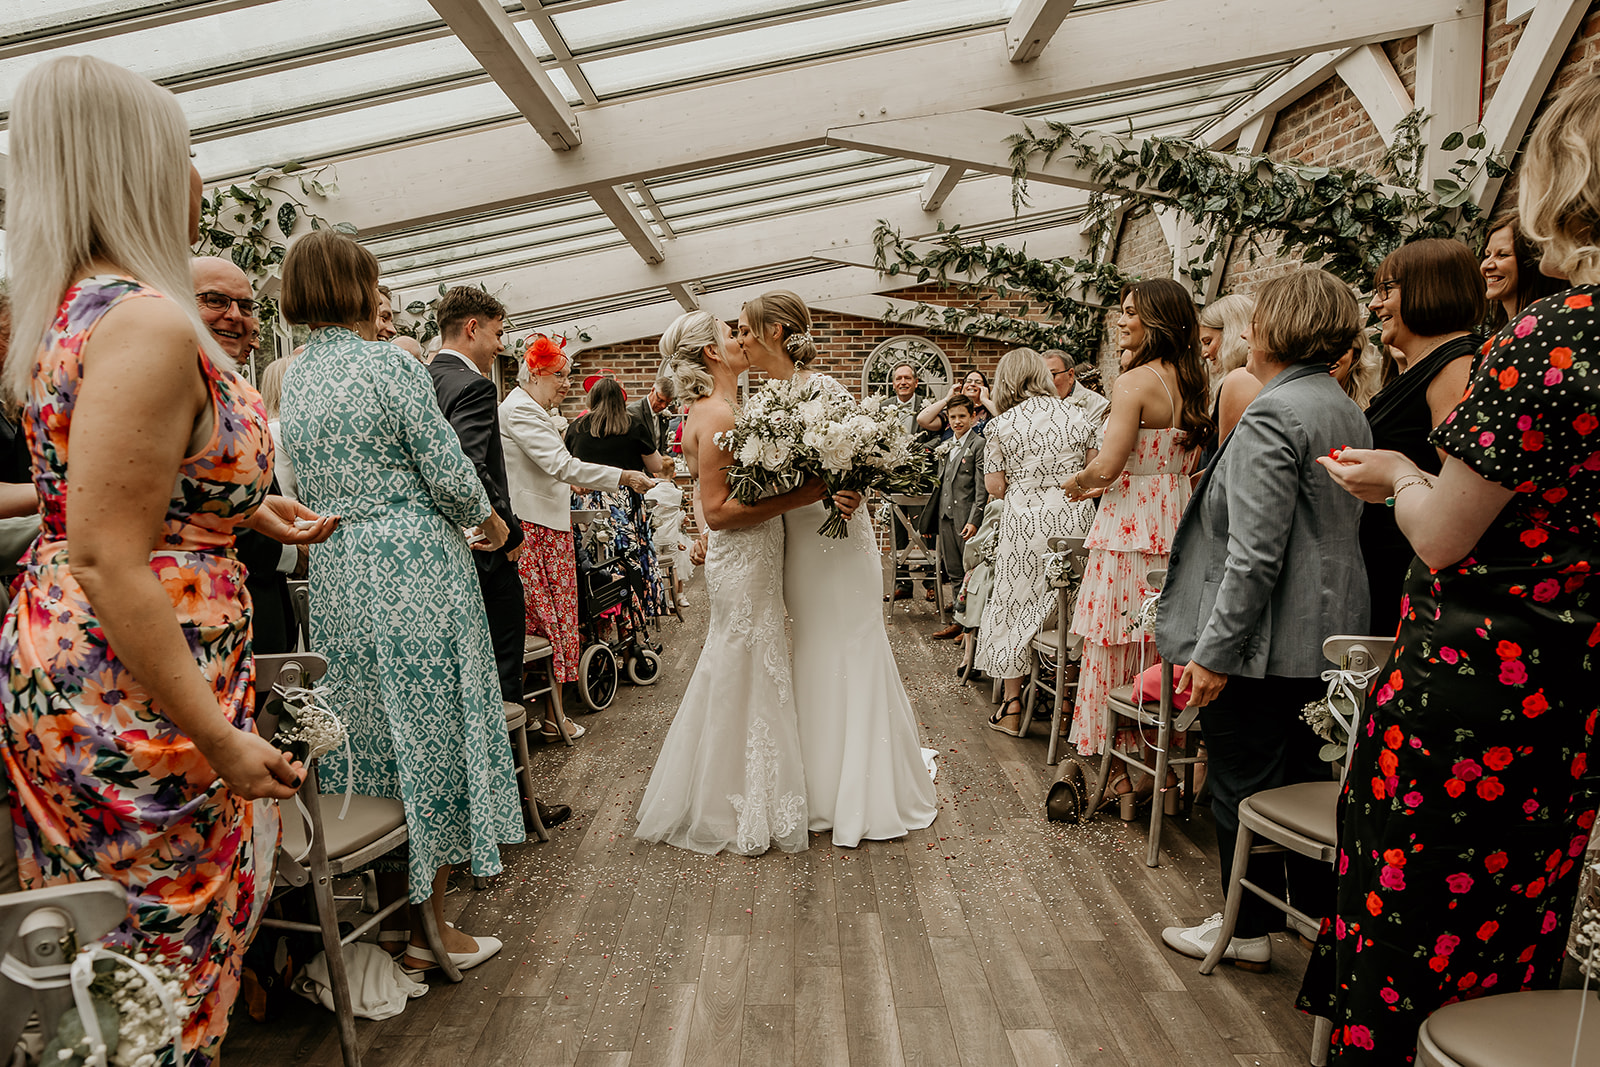 just married int he orangery at foxtails barn wedding venue